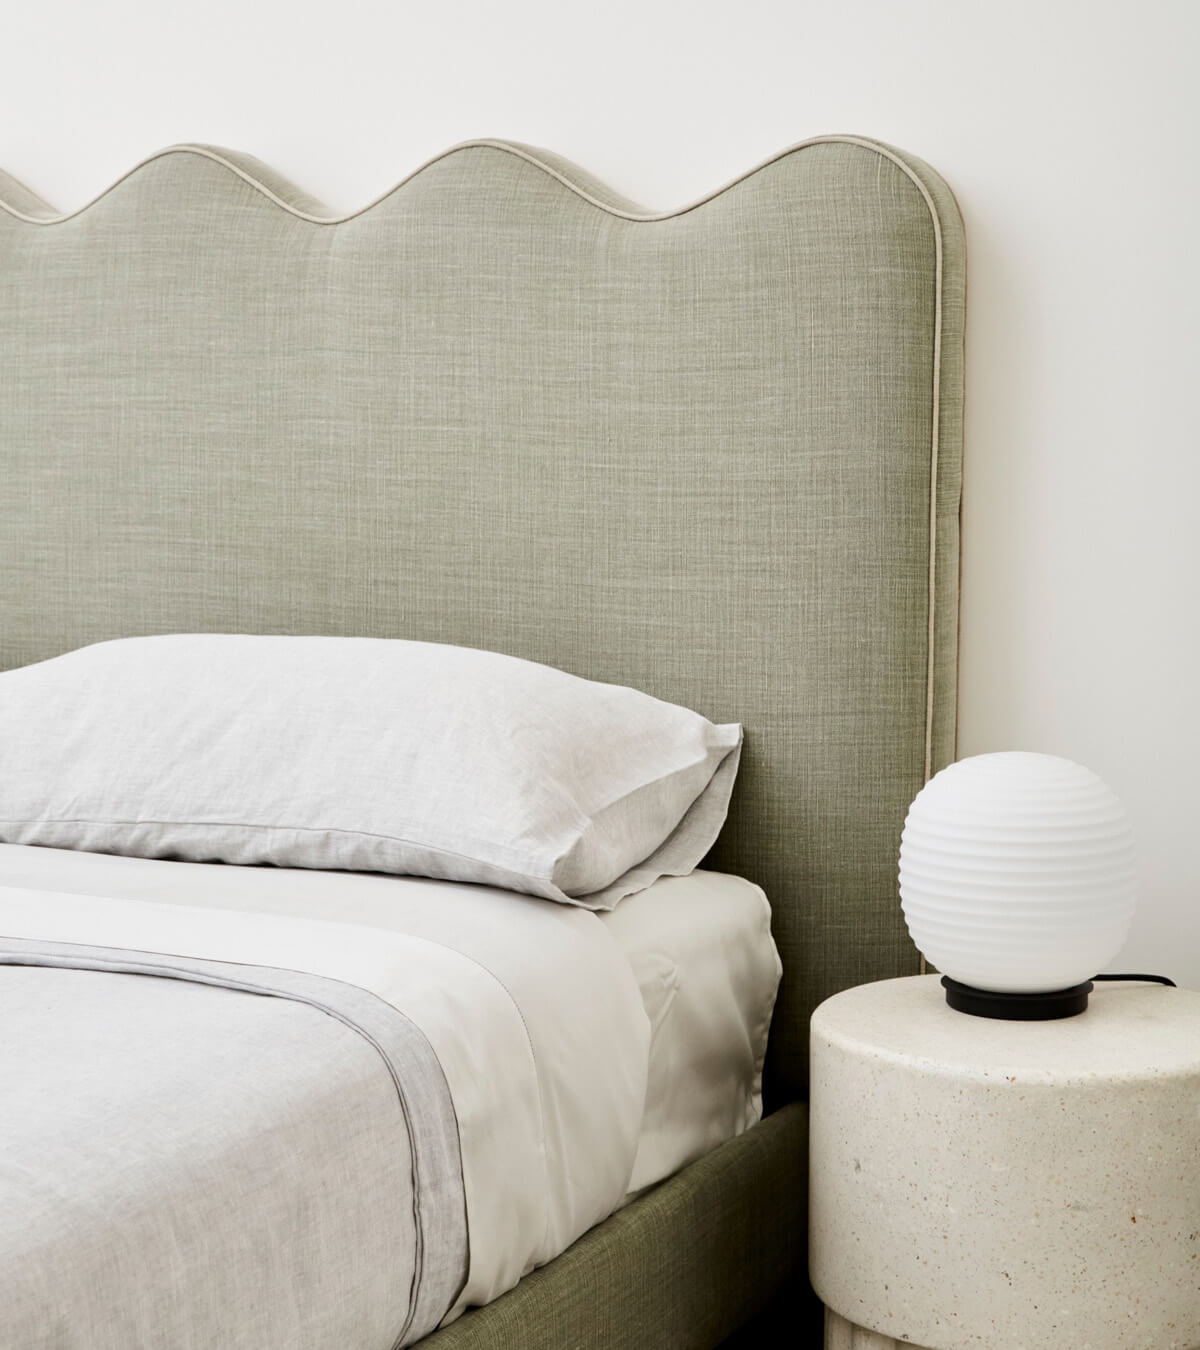 Wave Piped Fully Upholstered Bed – pictured in Tussock with contrast Birch piping.